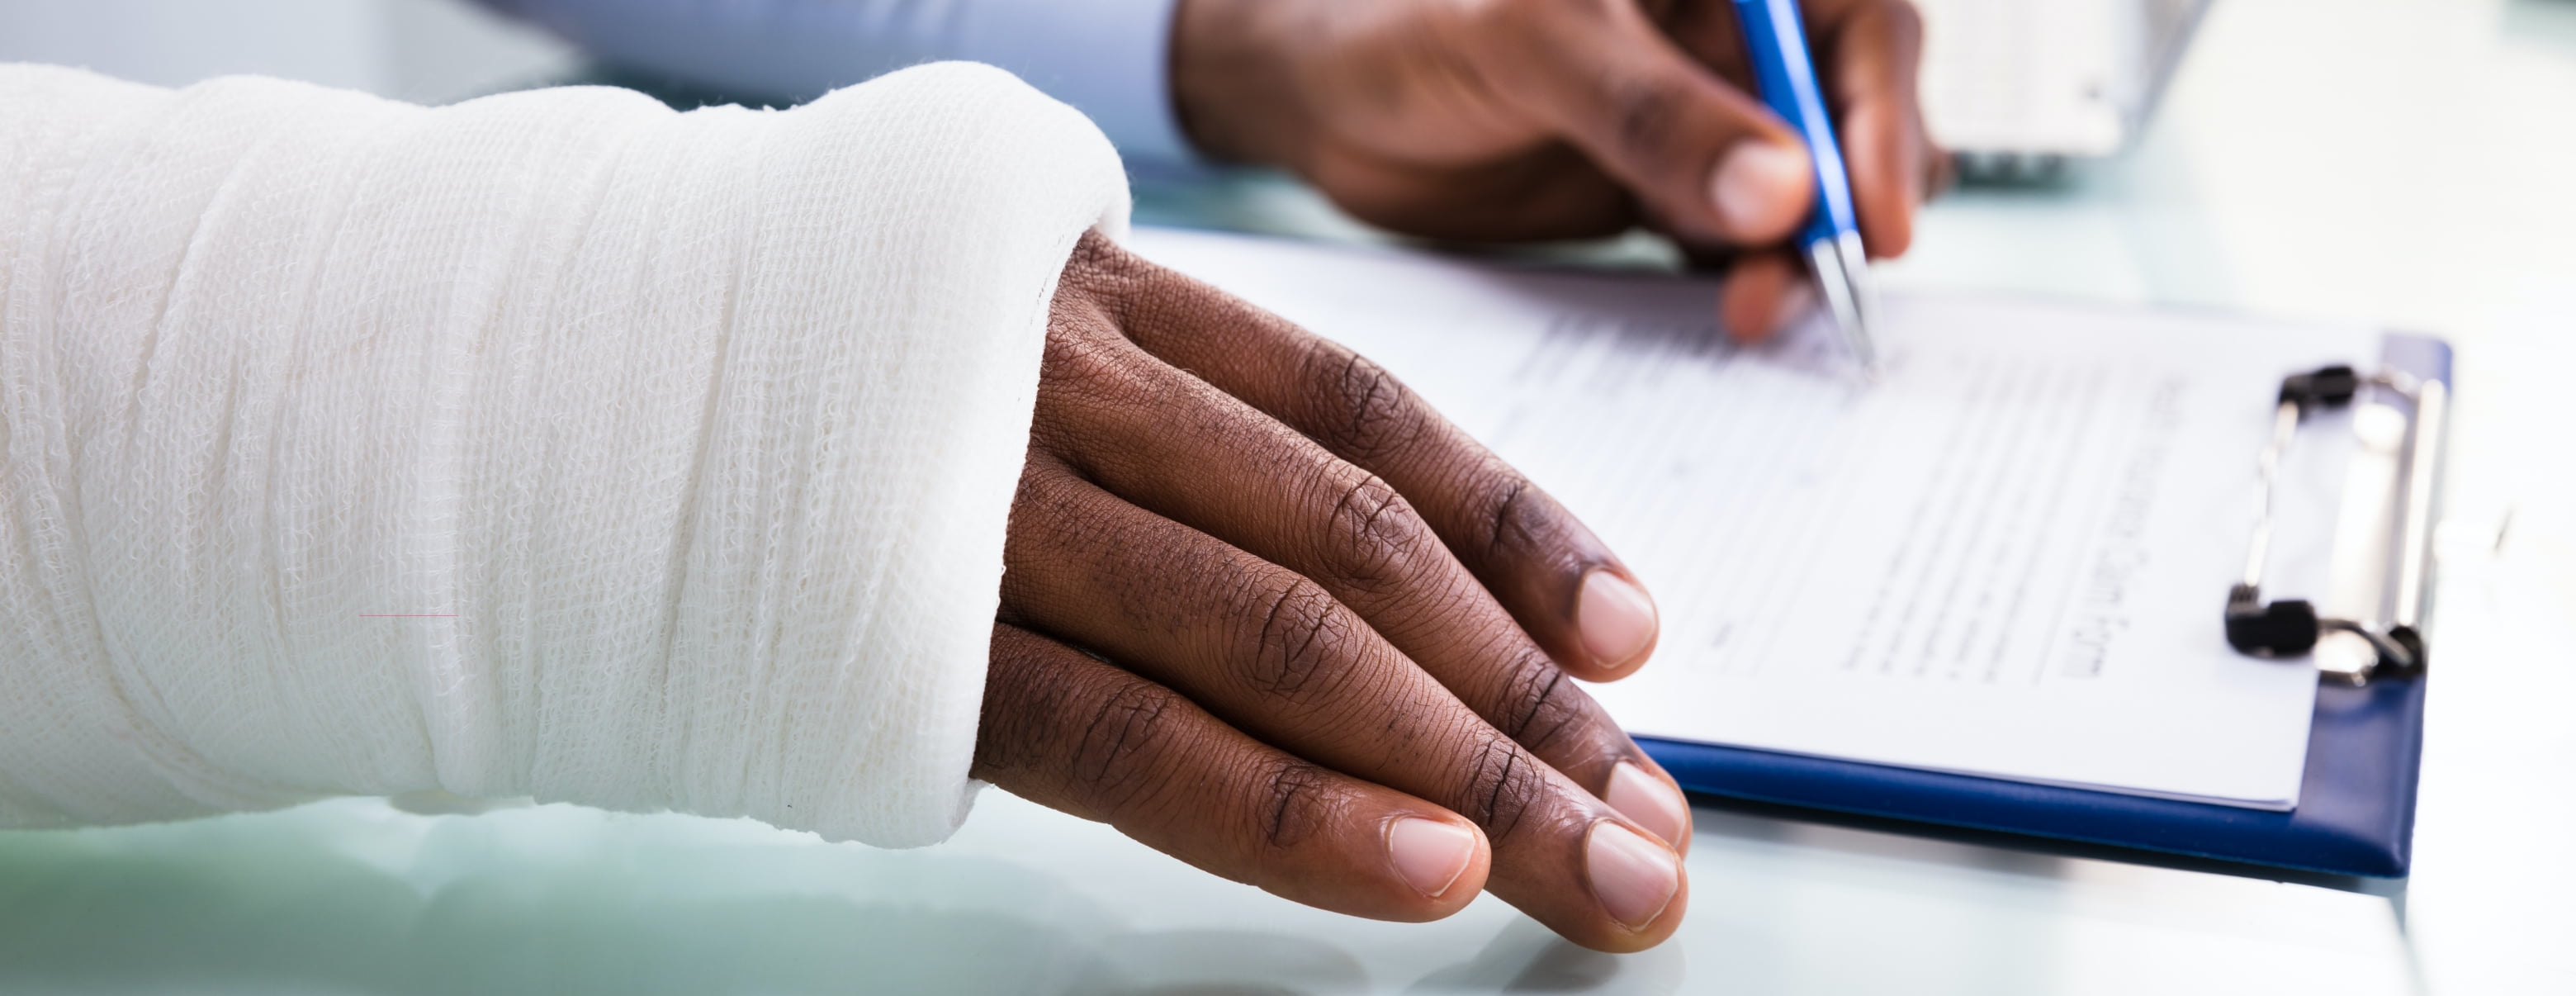 Injured employee with hand in cast - workers' compensation Colorado